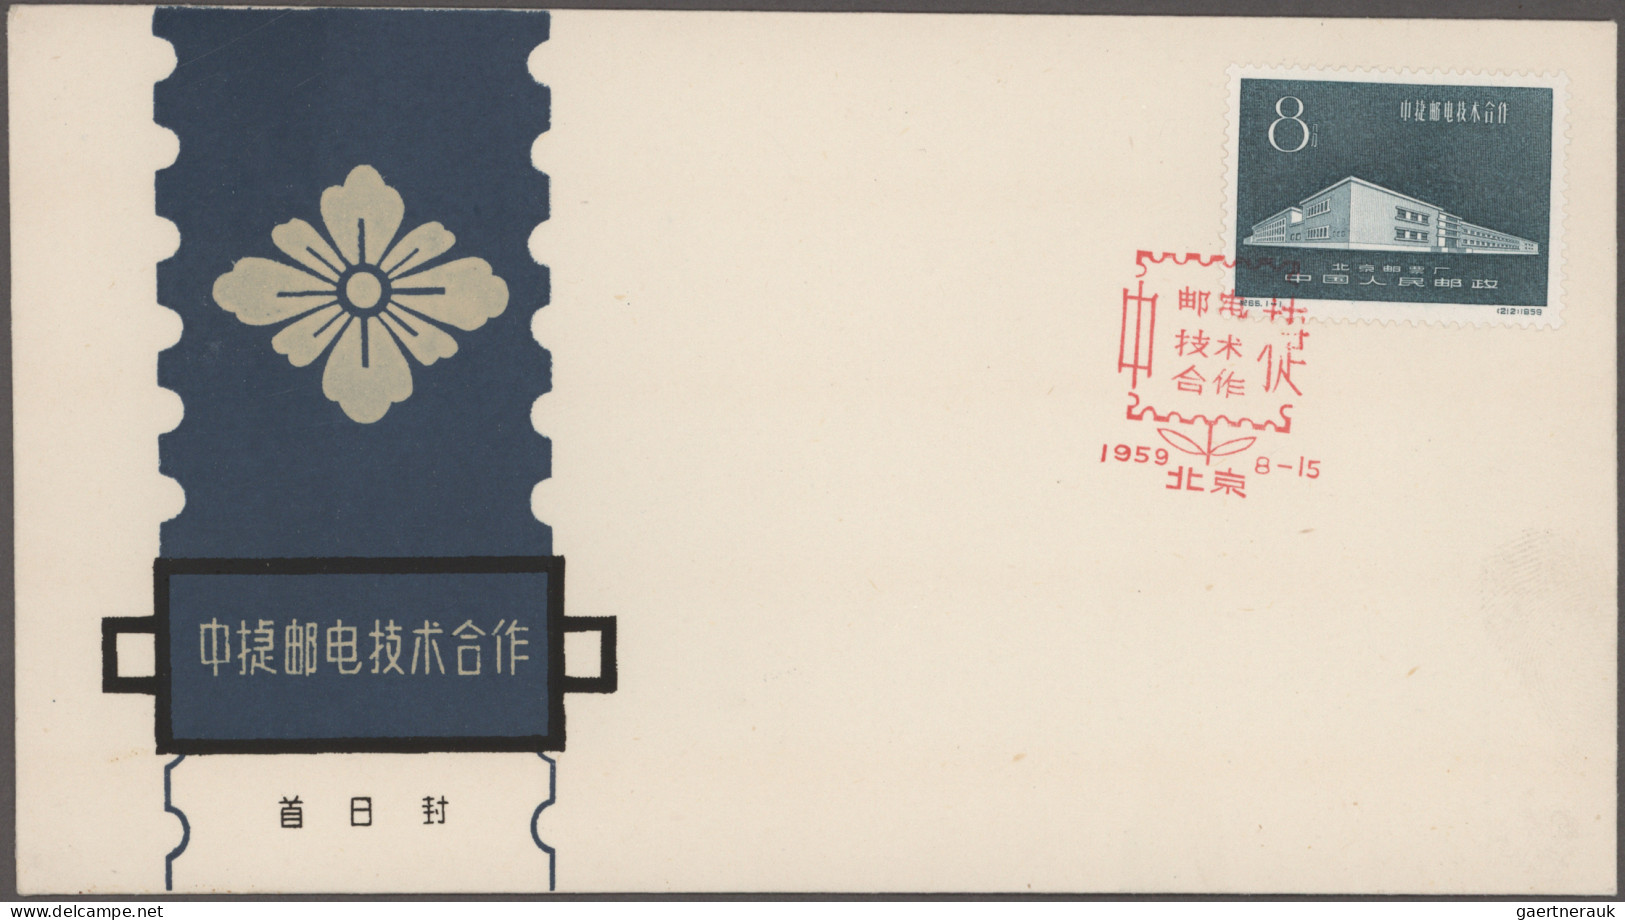 China (PRC): 1957/1961, unaddressed cacheted official FDC (12) of issues C44, C4